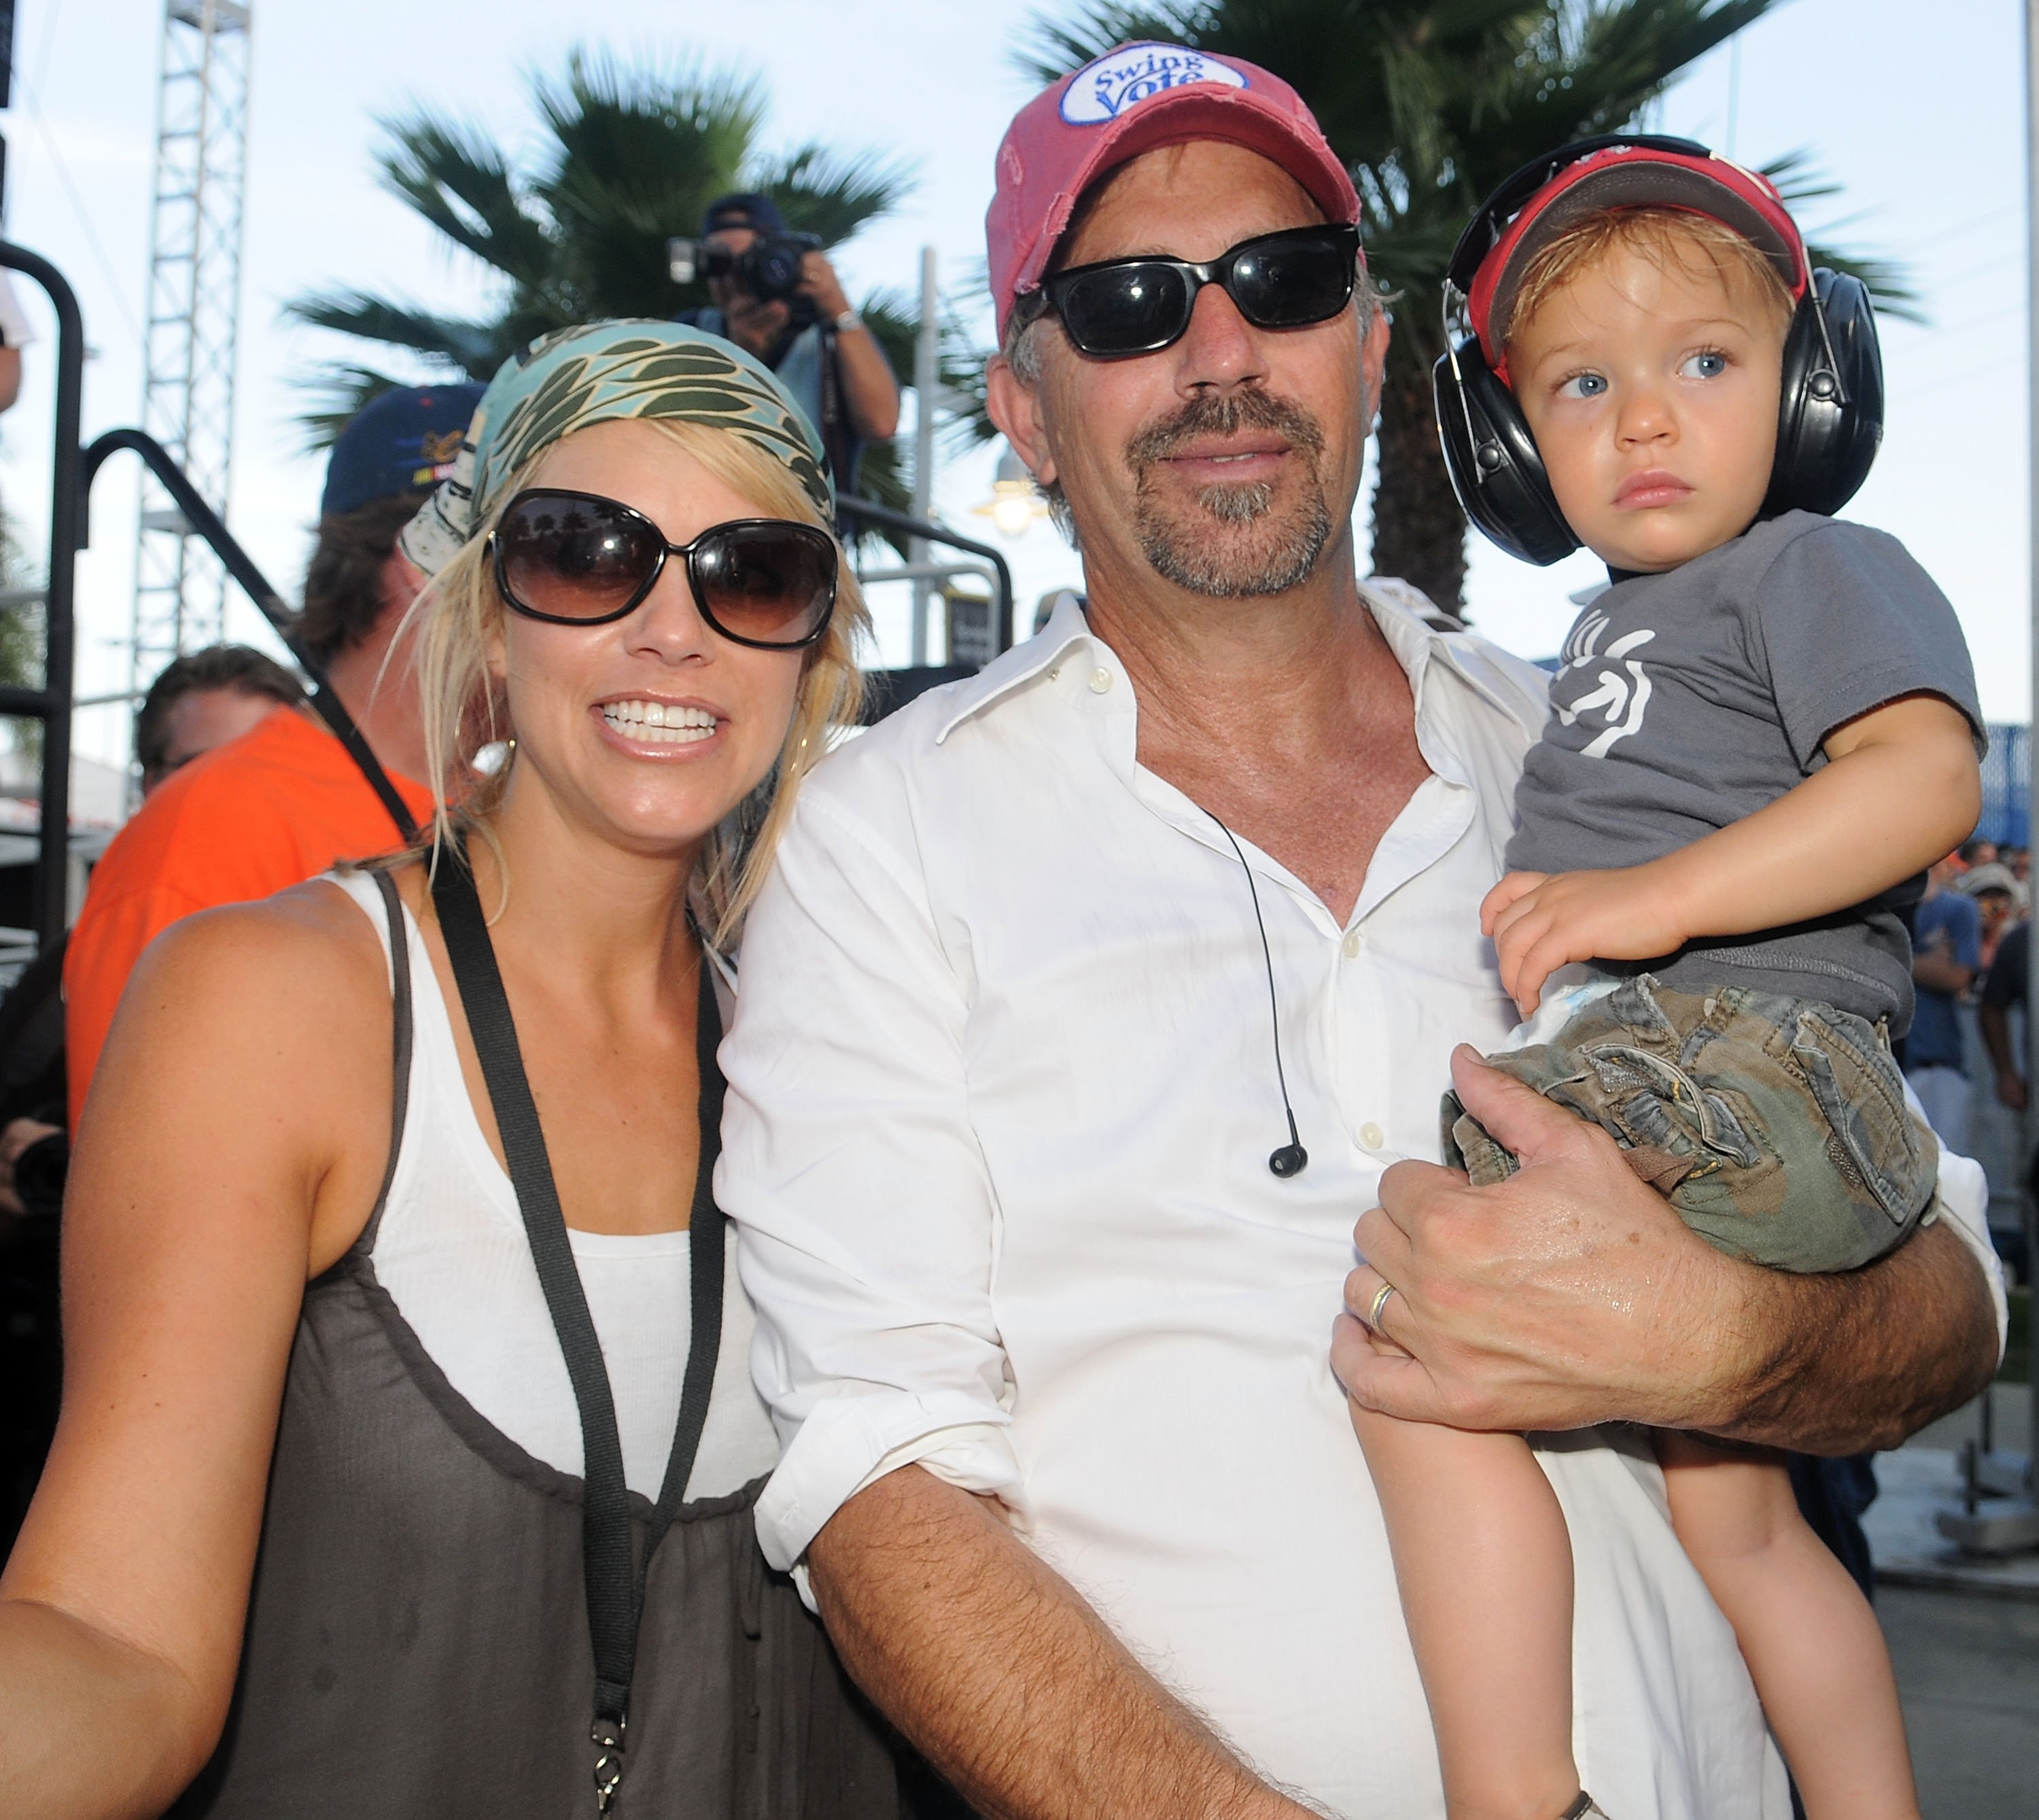 Kevin Costner, his wife Christine Baumgartner, and their son Cayden Costner during the Sprint Fan Zone on July 5, 2008, in Daytona Beach, Florida 